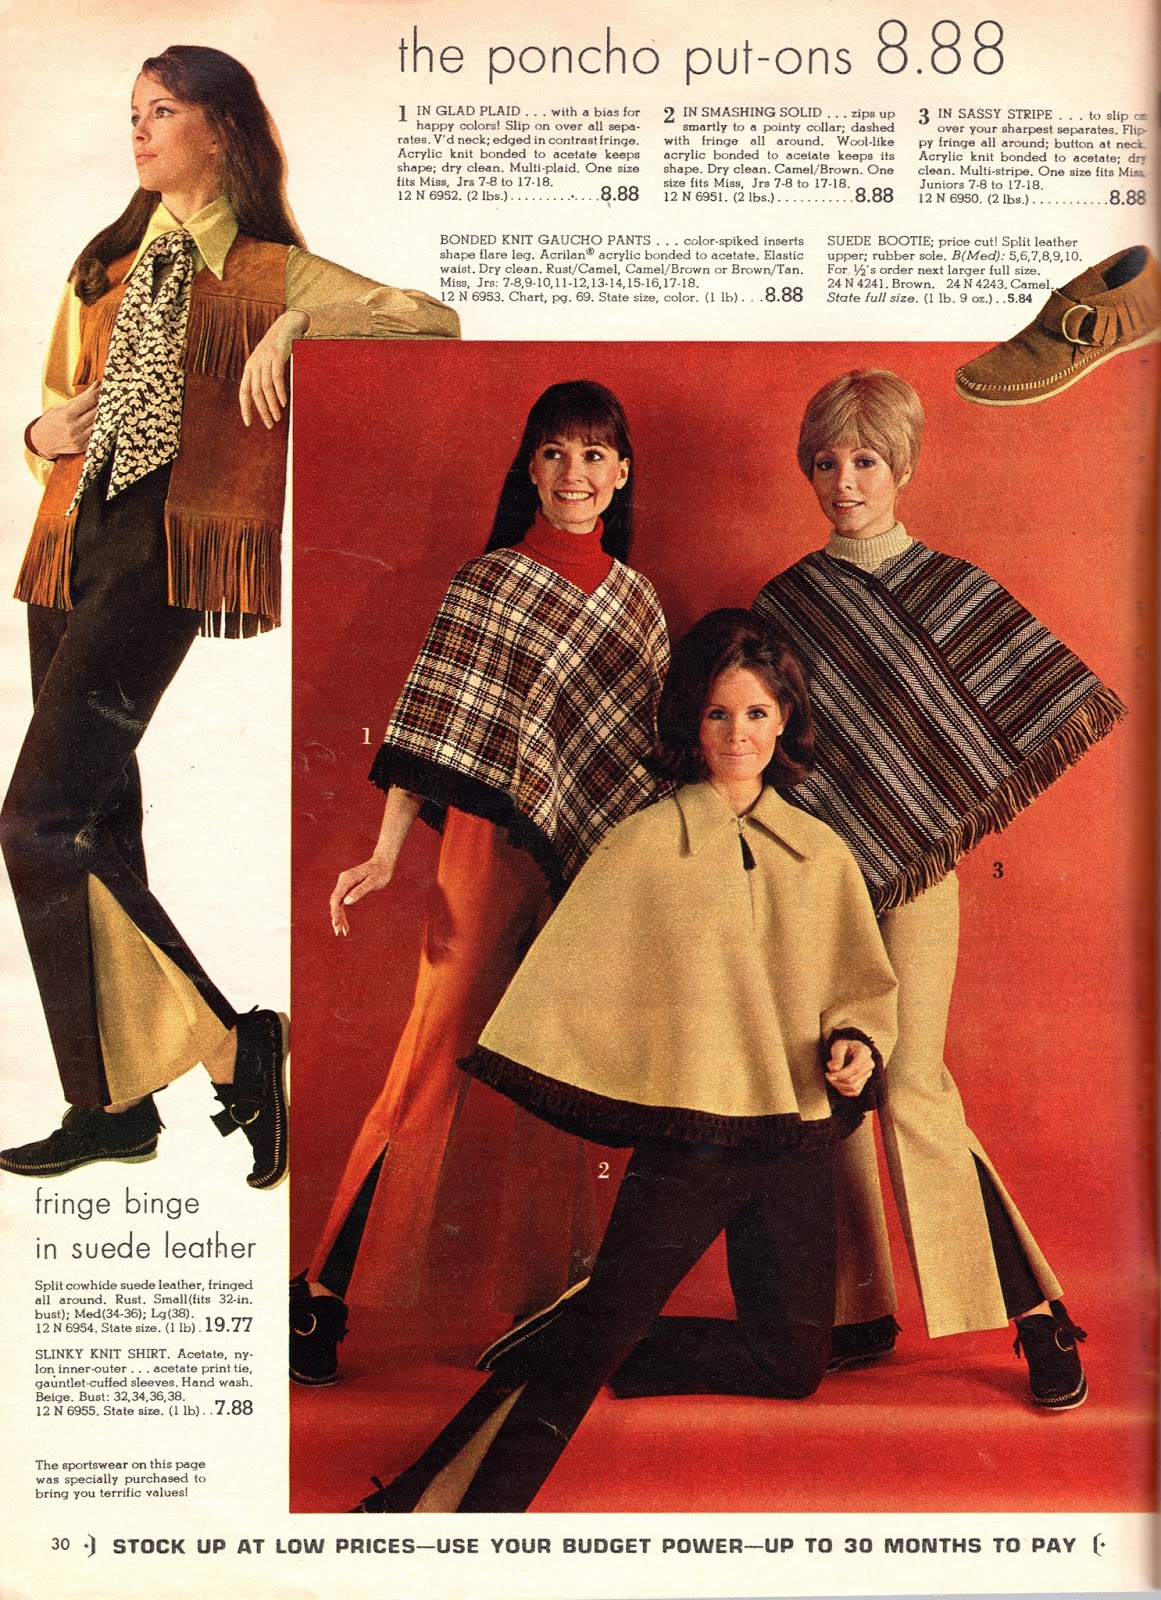 Kathy Loghry Blogspot: That's So 70s: The Poncho Put-On!!